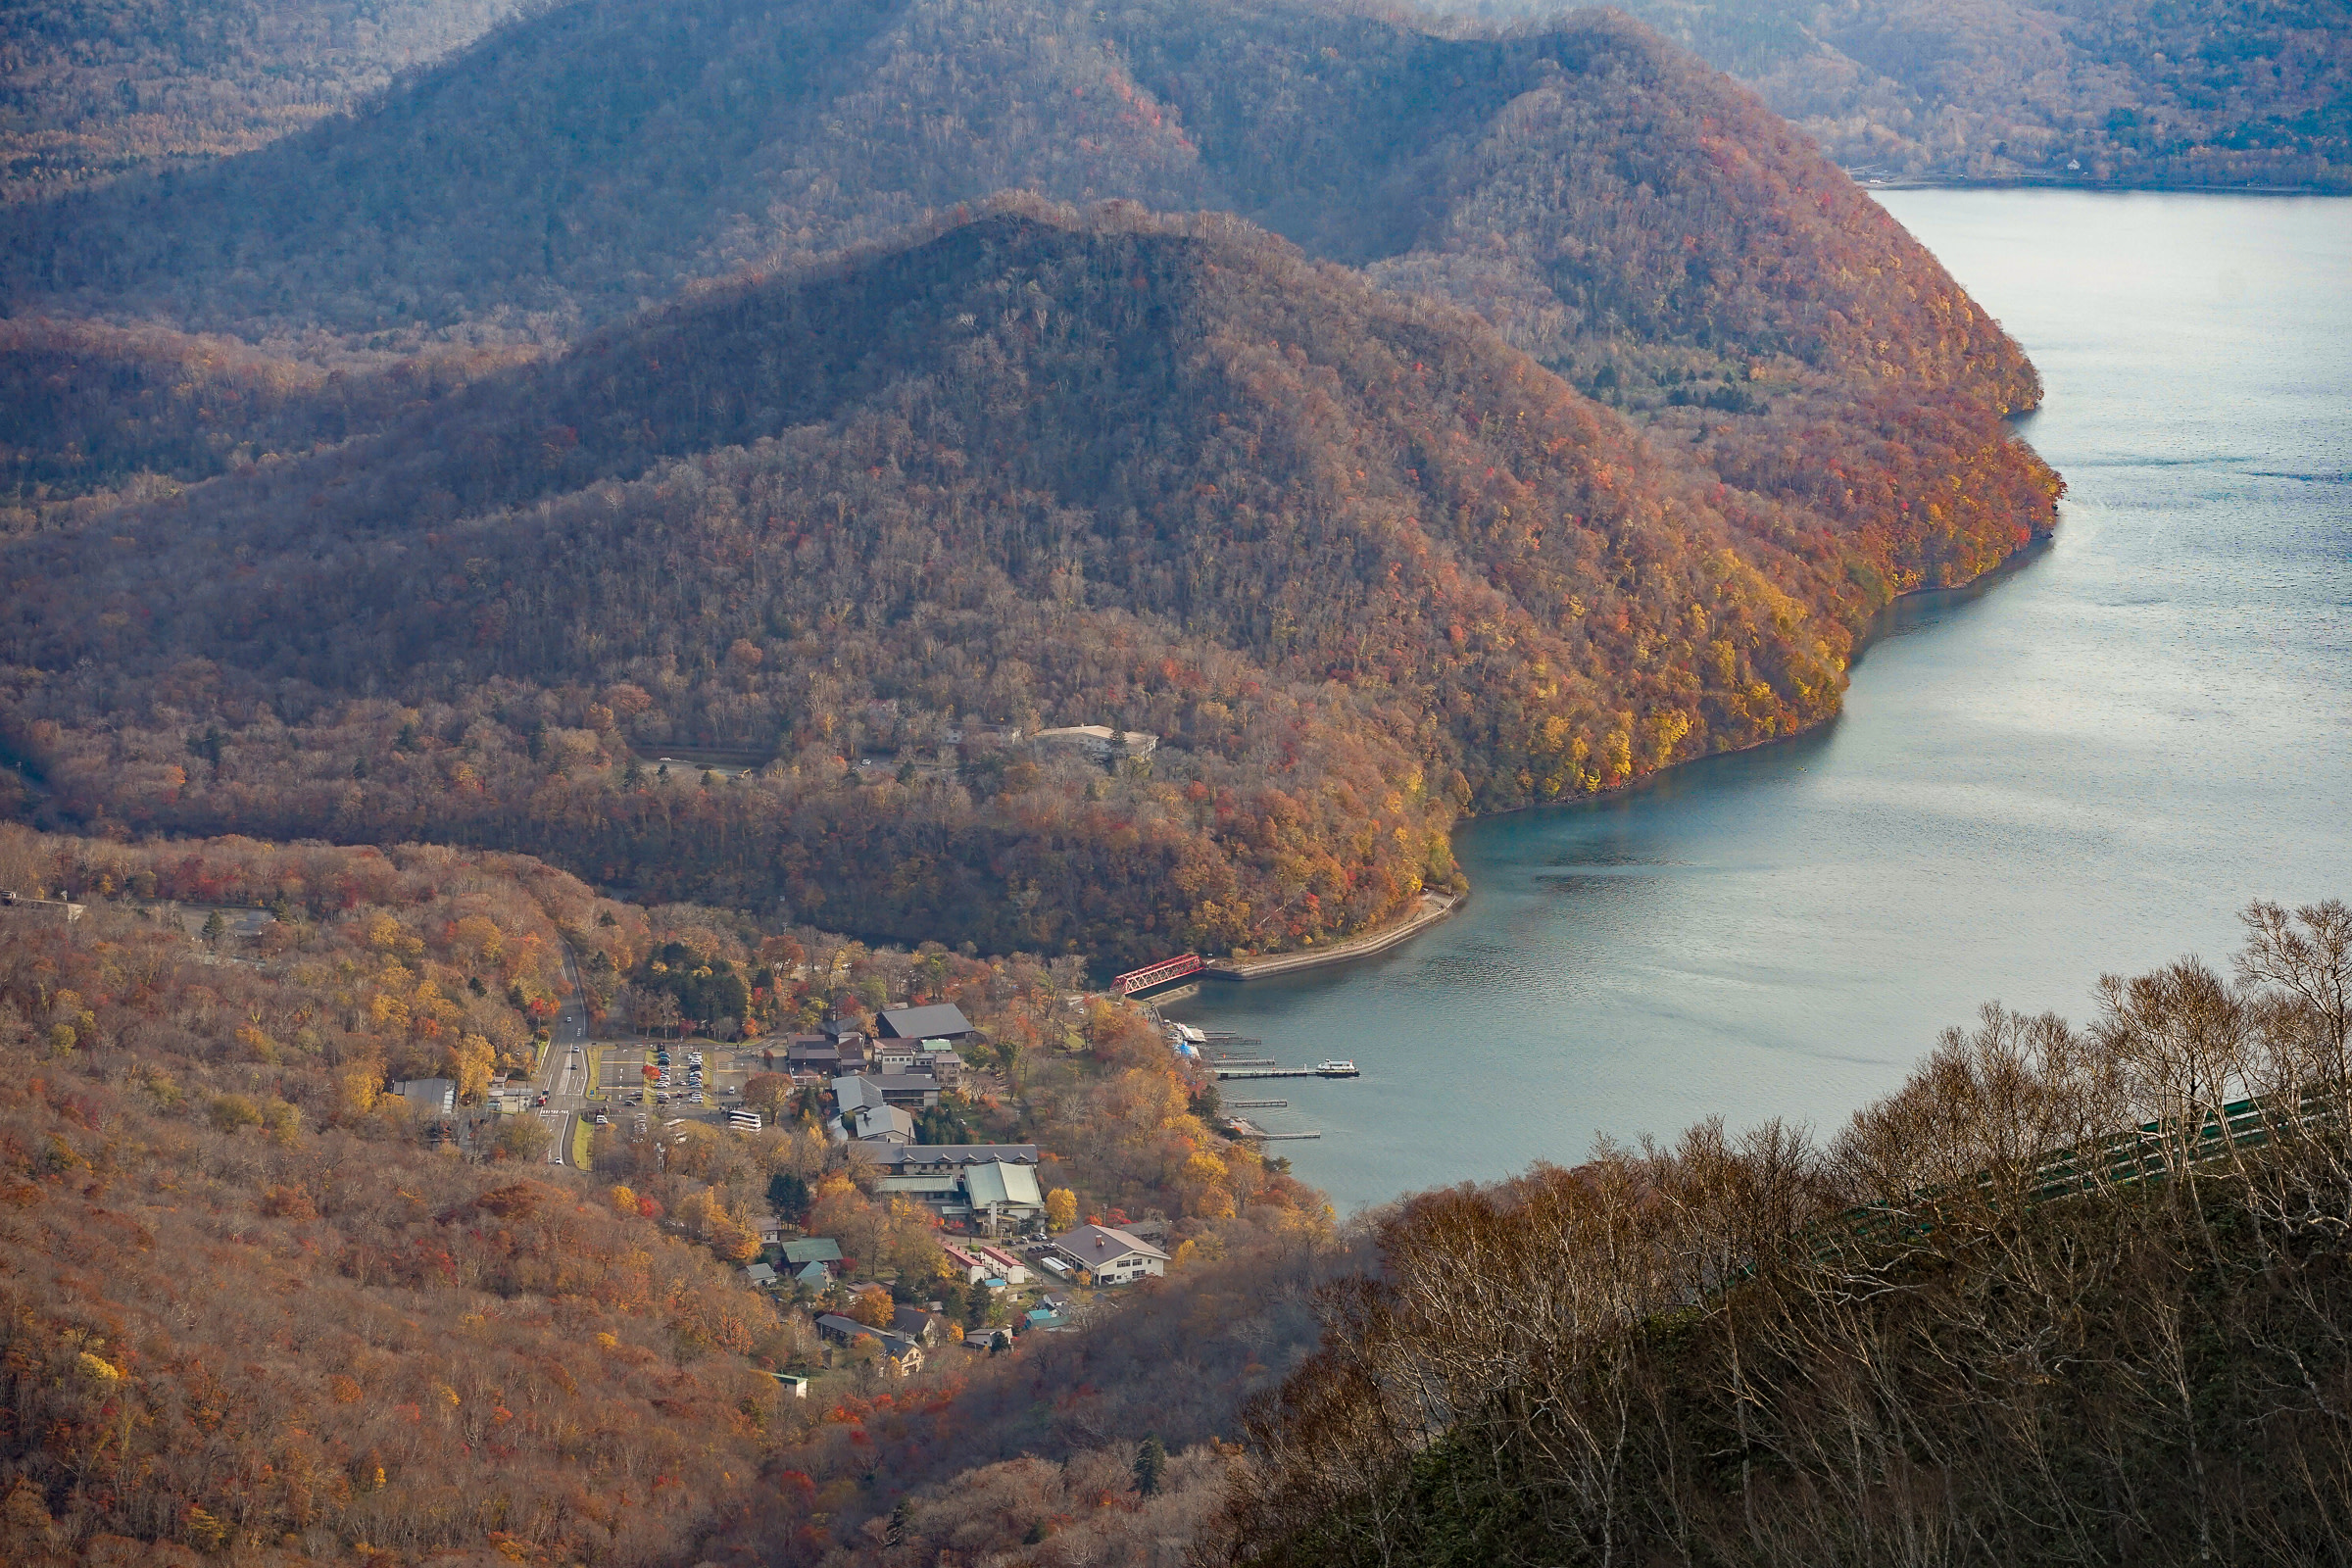 A shot of Lake Shikotsu's shore from Mt. Monbetsu's trail. The hills and mountains are a curious mixture of orange, red and brown.